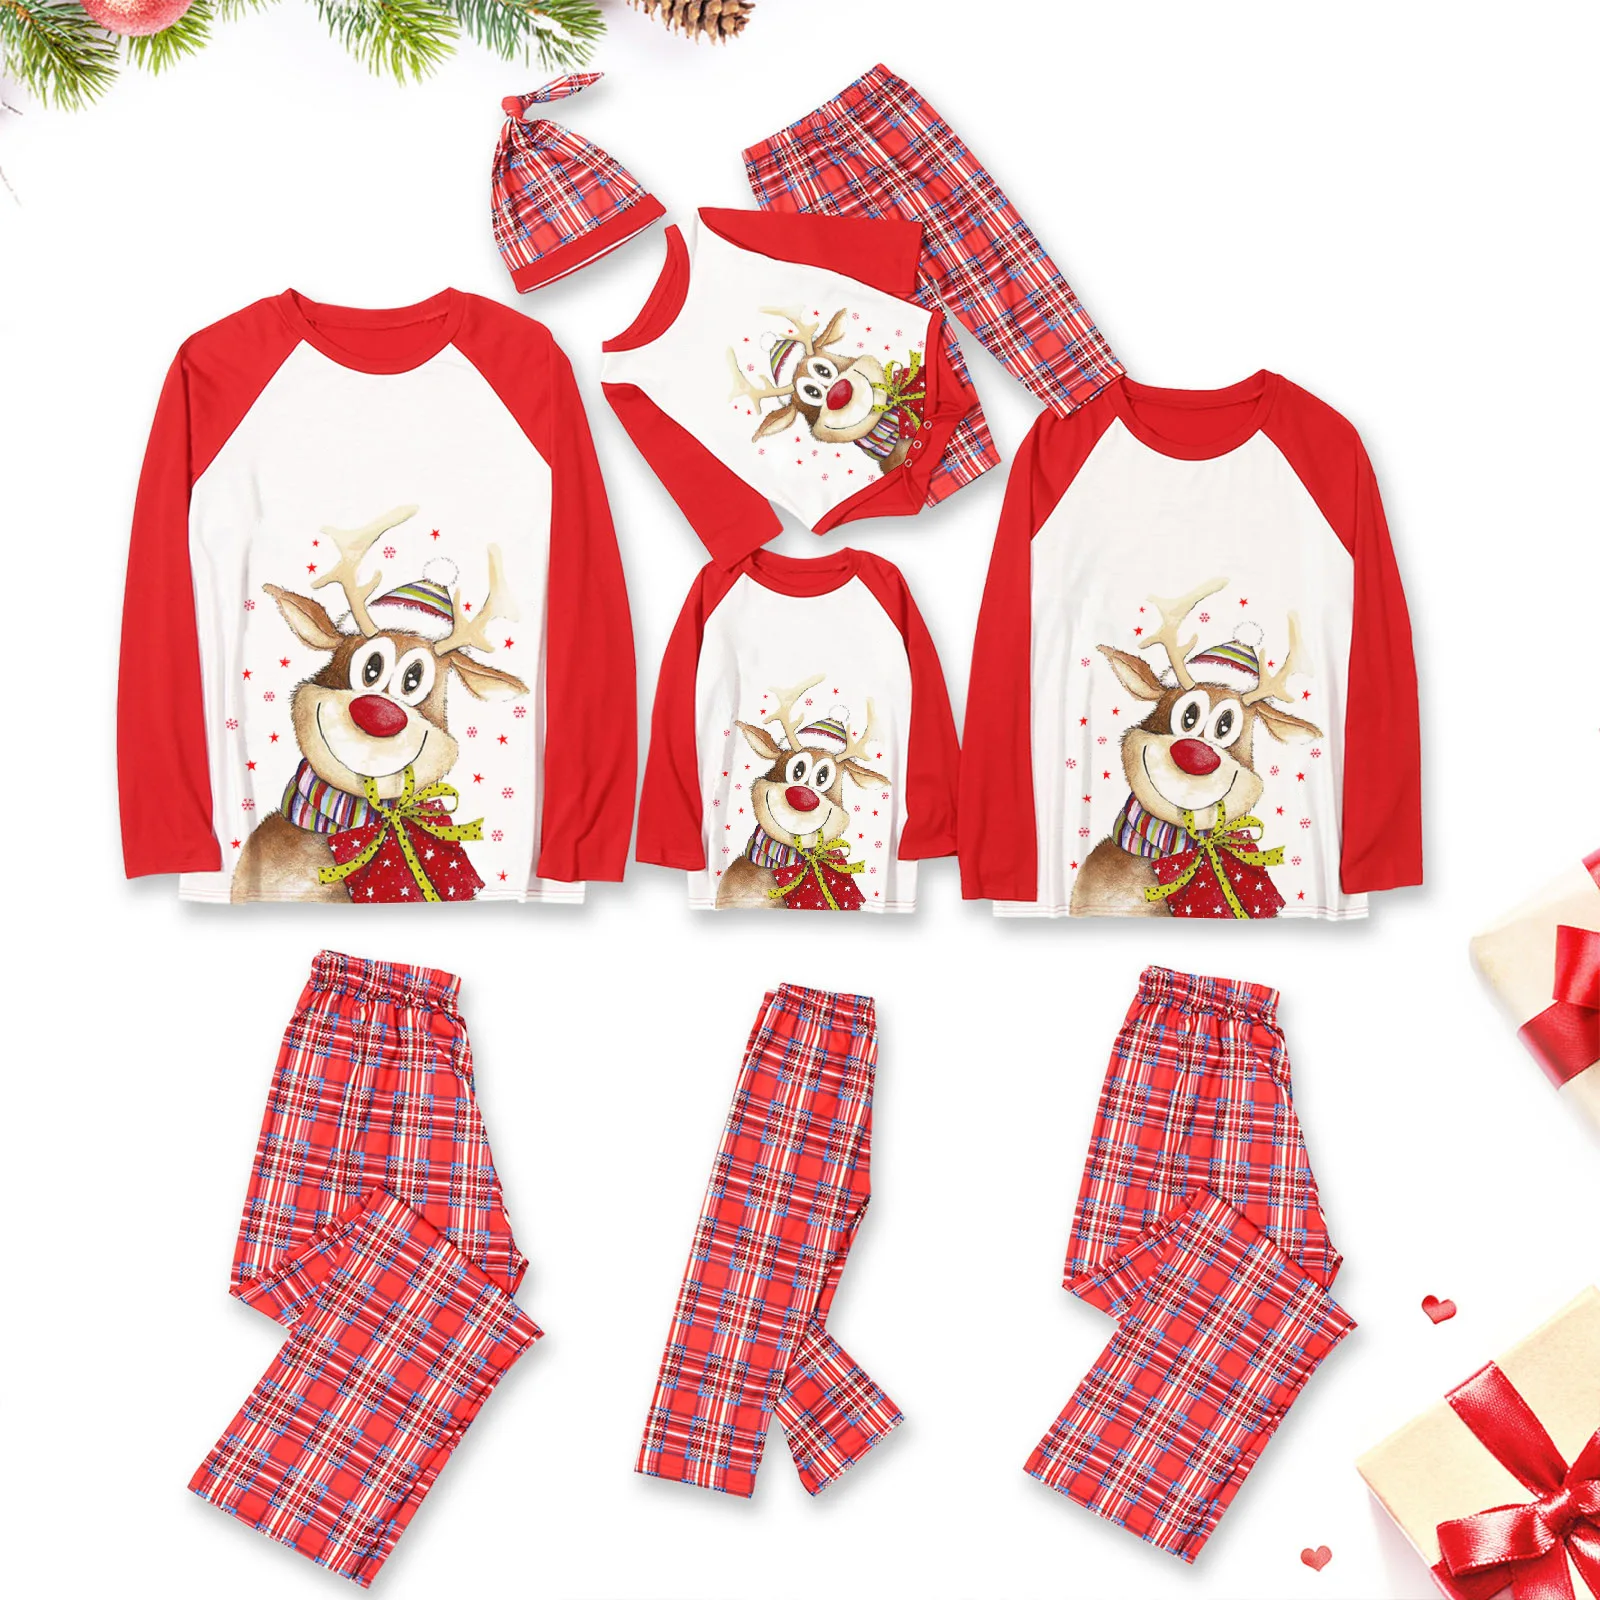 Couple Family Christmas Pajamas 2022 New Year Costume For Children Mother Kids Clothes Matching Outfits Christmas Pajamas Set